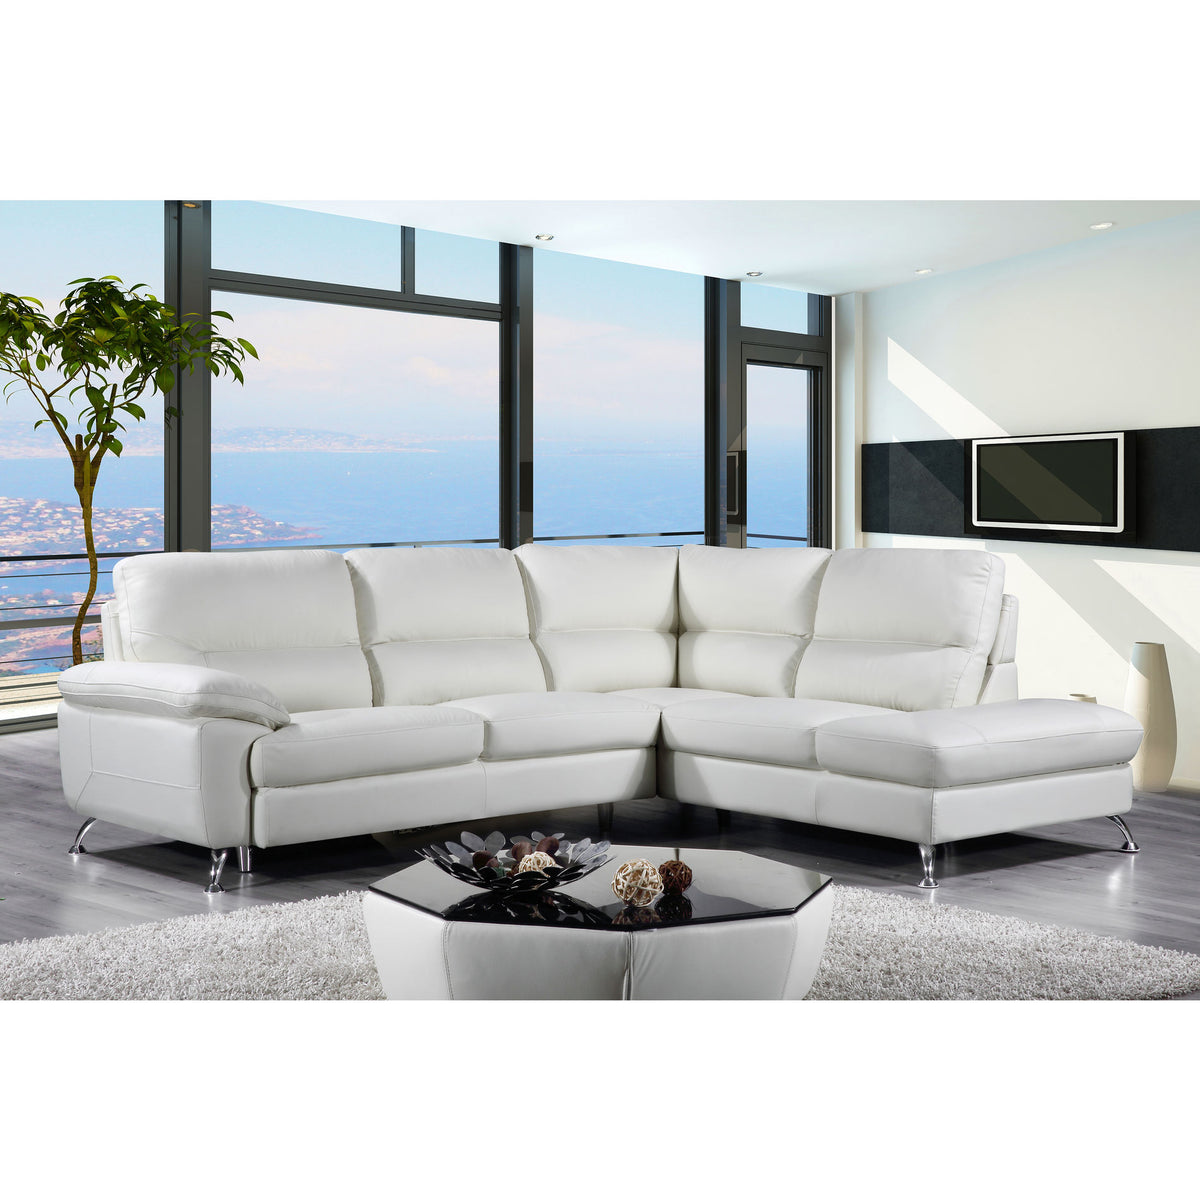 Cortesi Home Contemporary Orlando Genuine Leather Sectional Sofa with Right Chaise Lounge, Cream 98&quot;x80&quot;